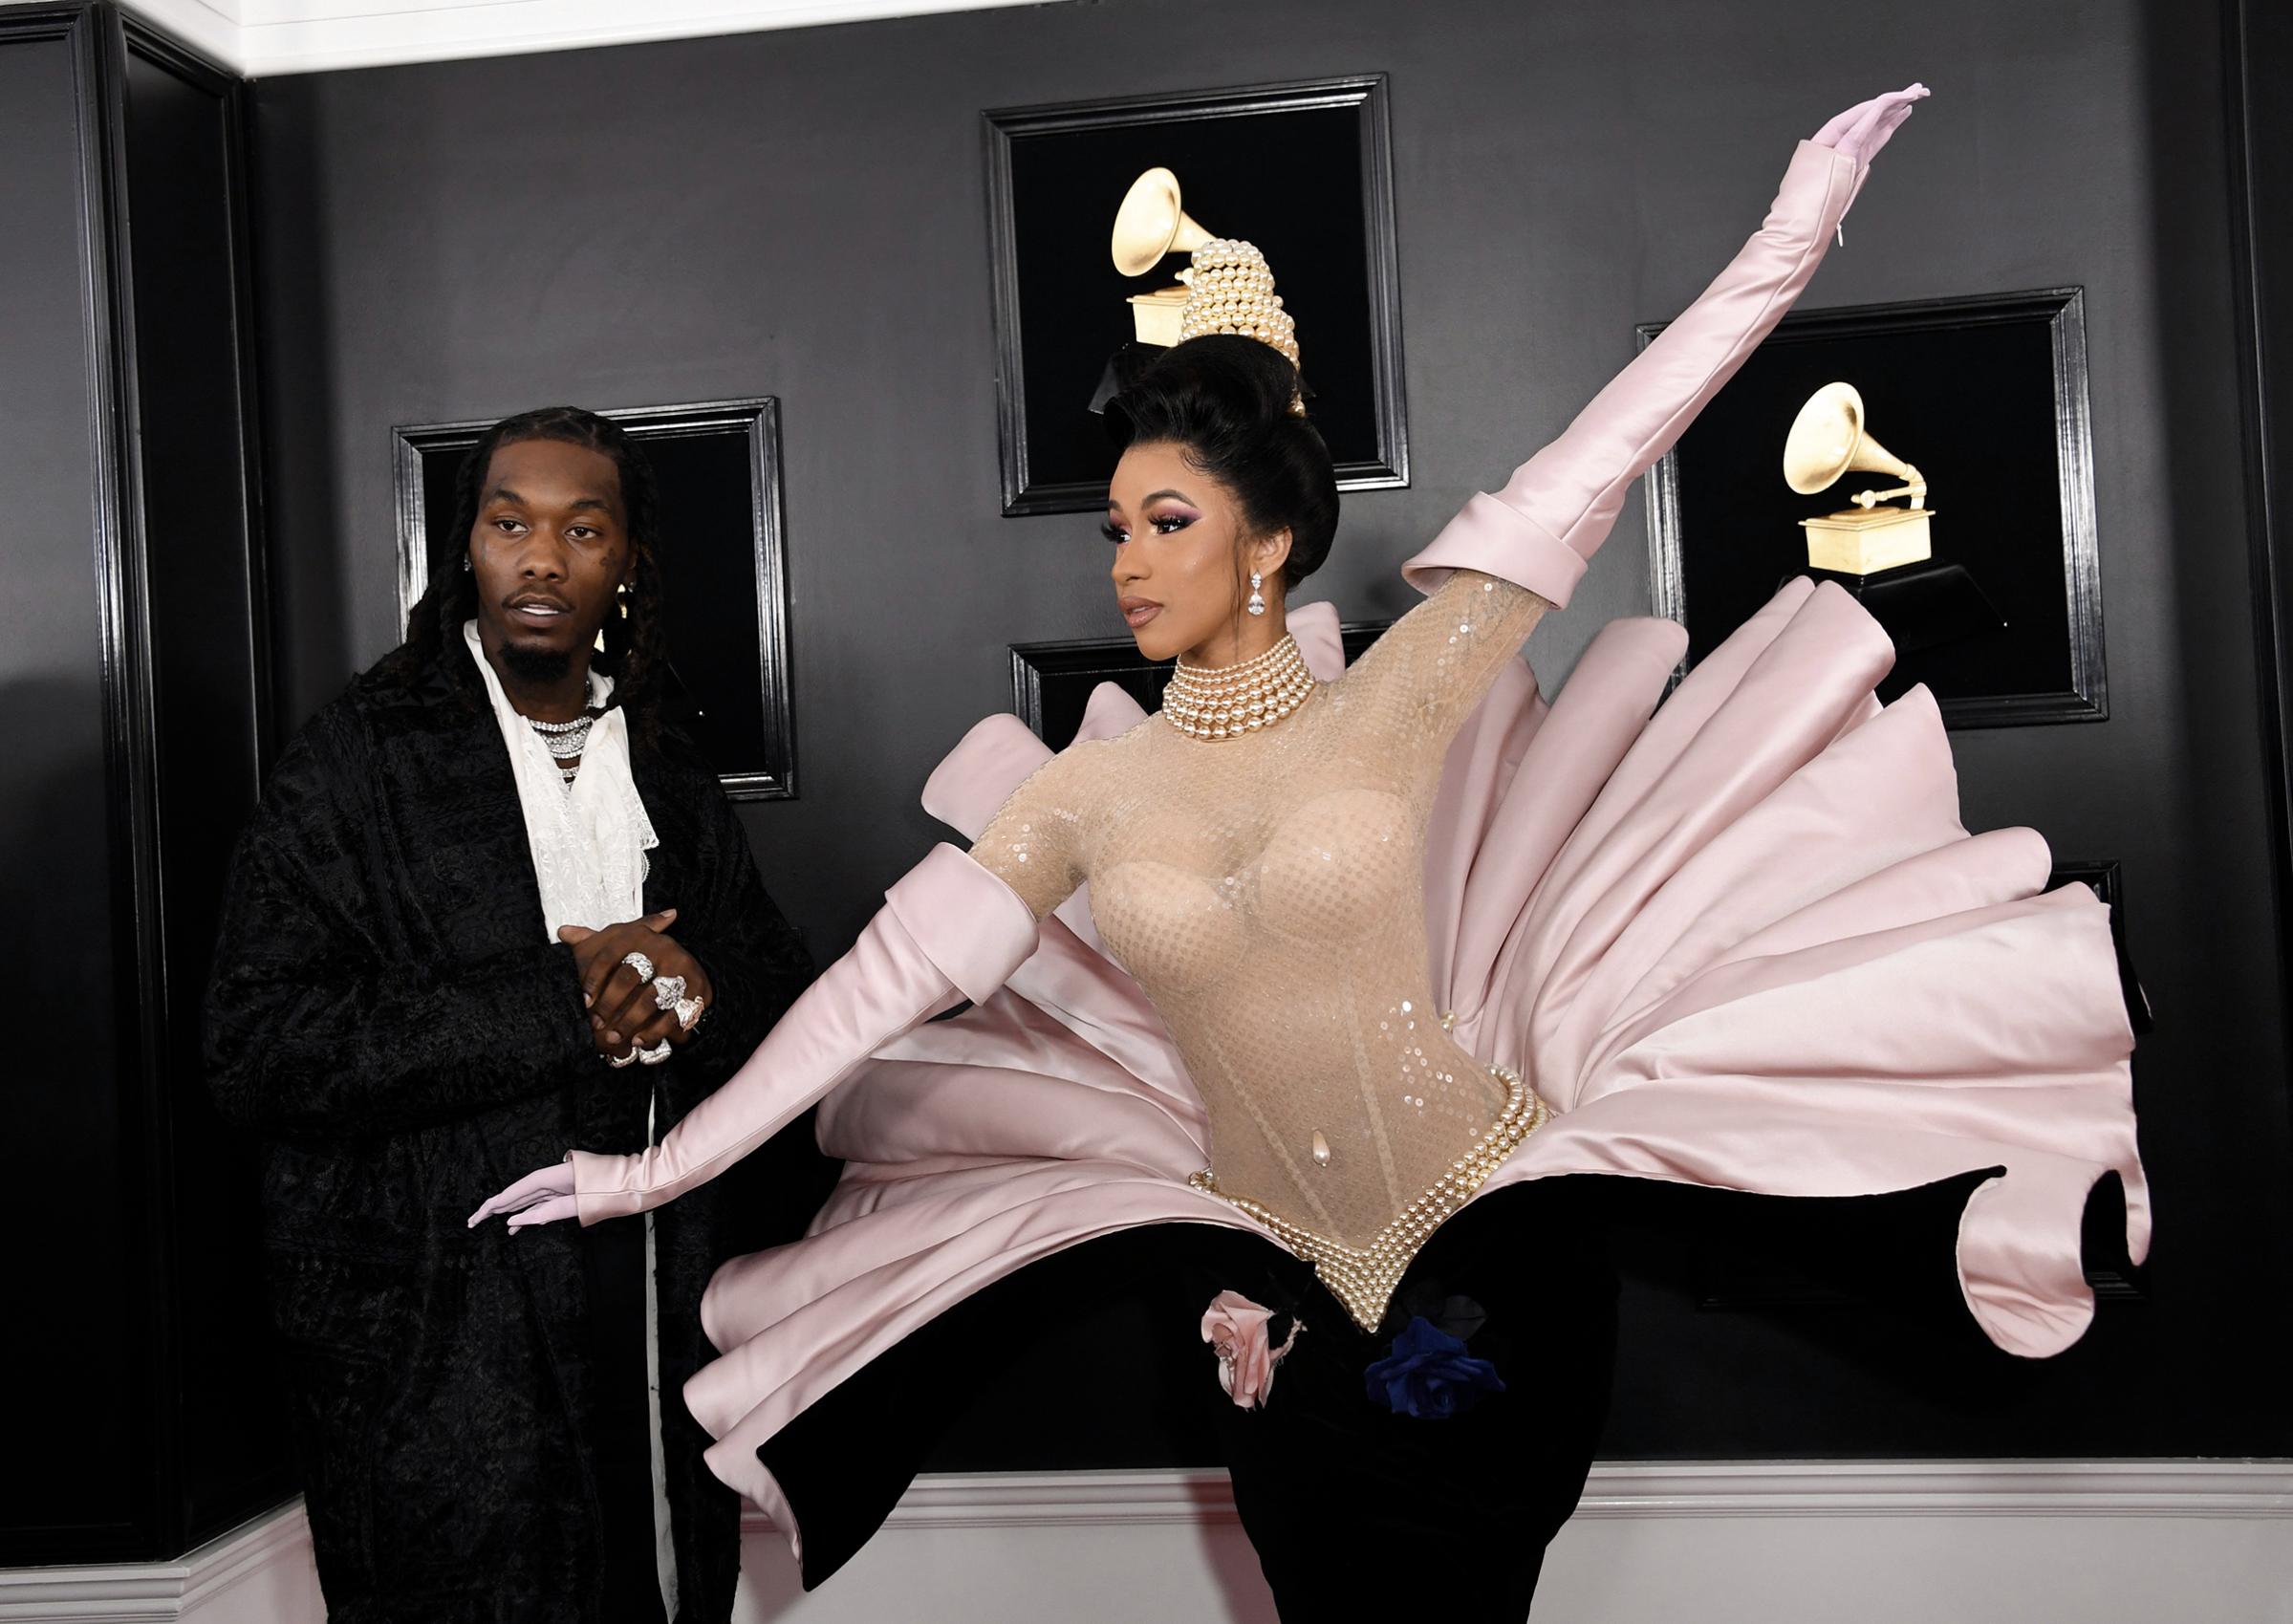 Rapper Cardi B and Offset arrive for the 61st Annual Grammy Awards